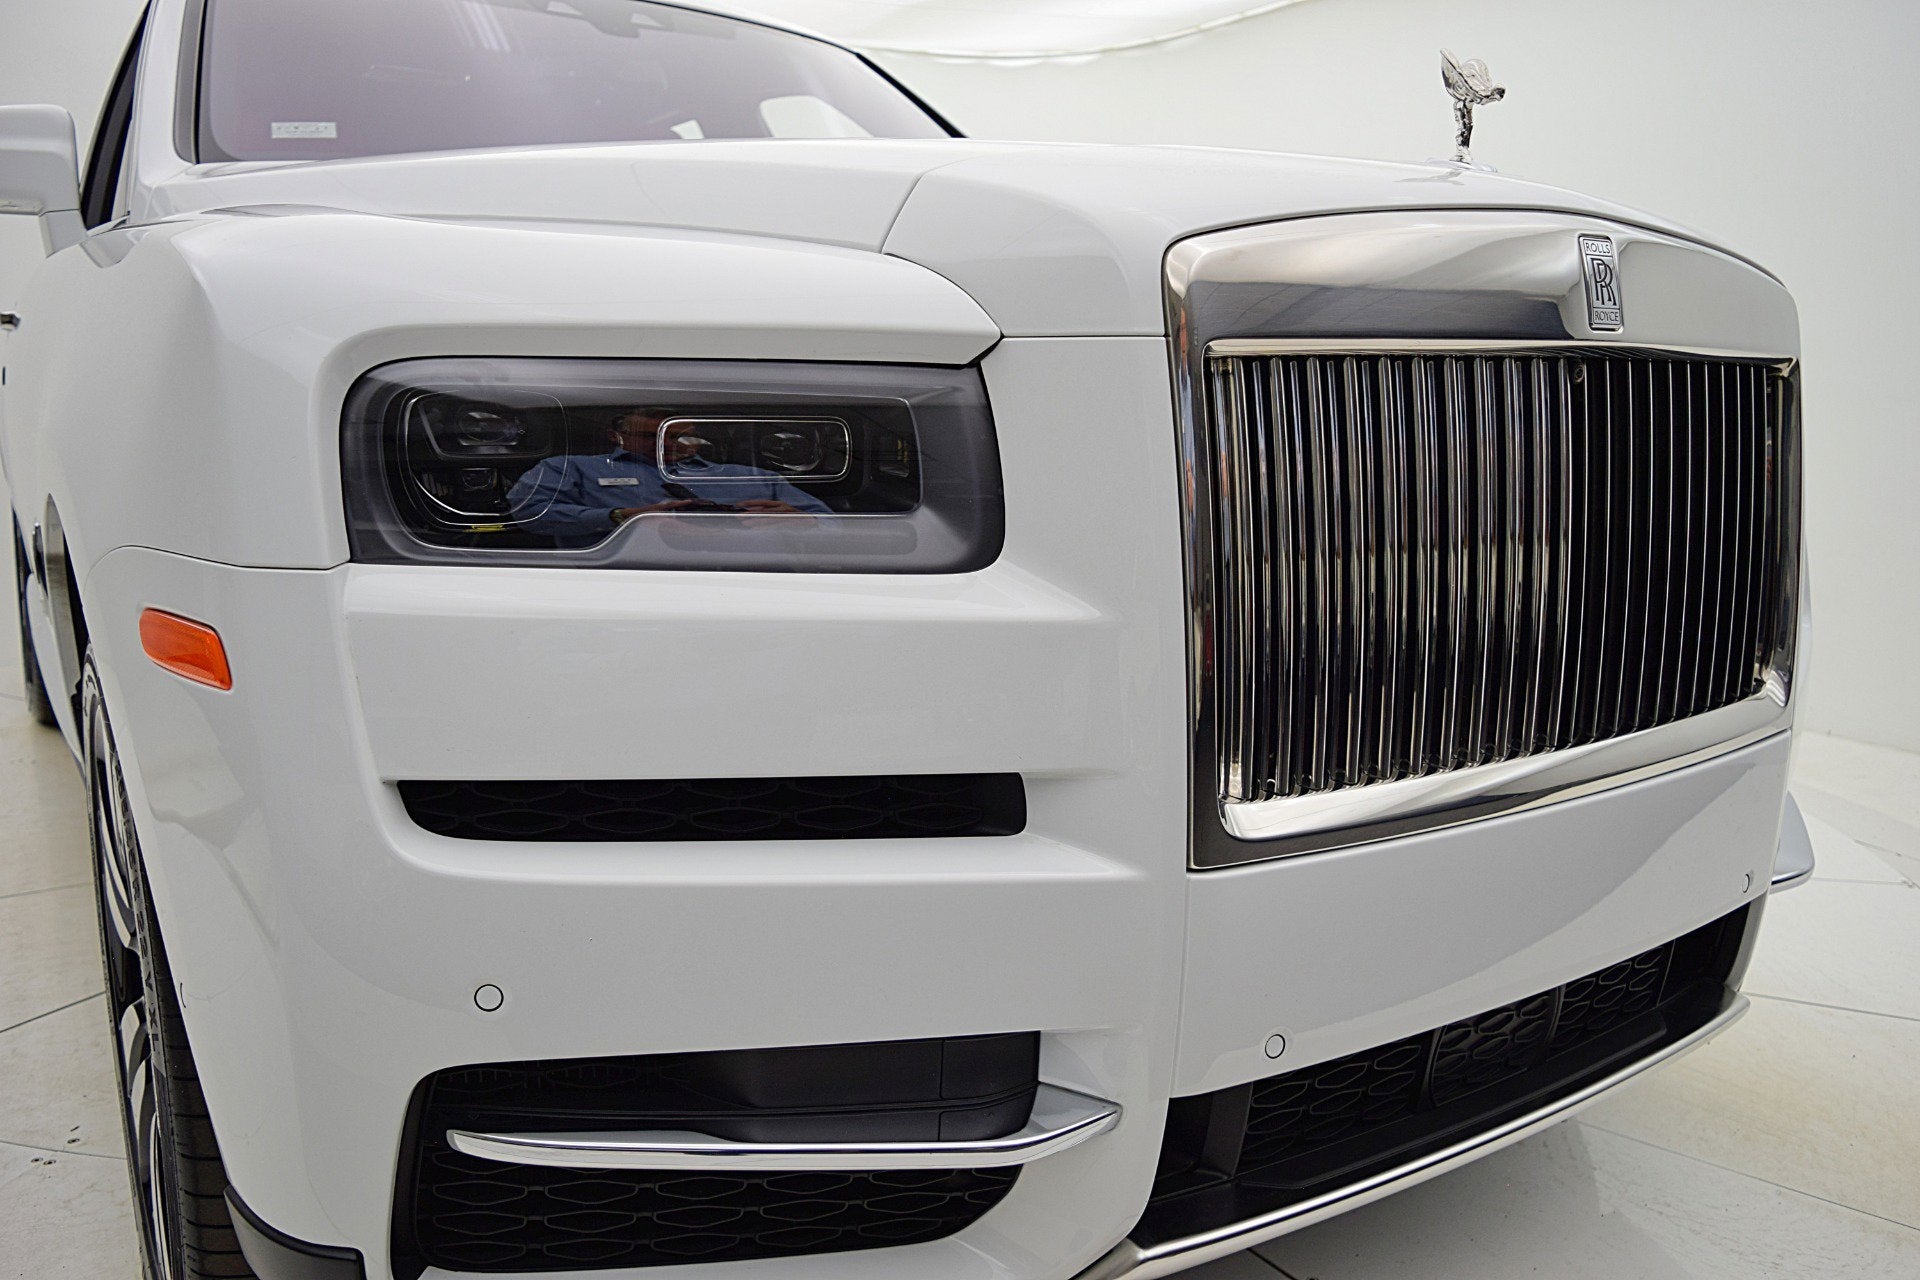 2022 Rolls-Royce Cullinan / LEASE OPTIONS AVAILABLE